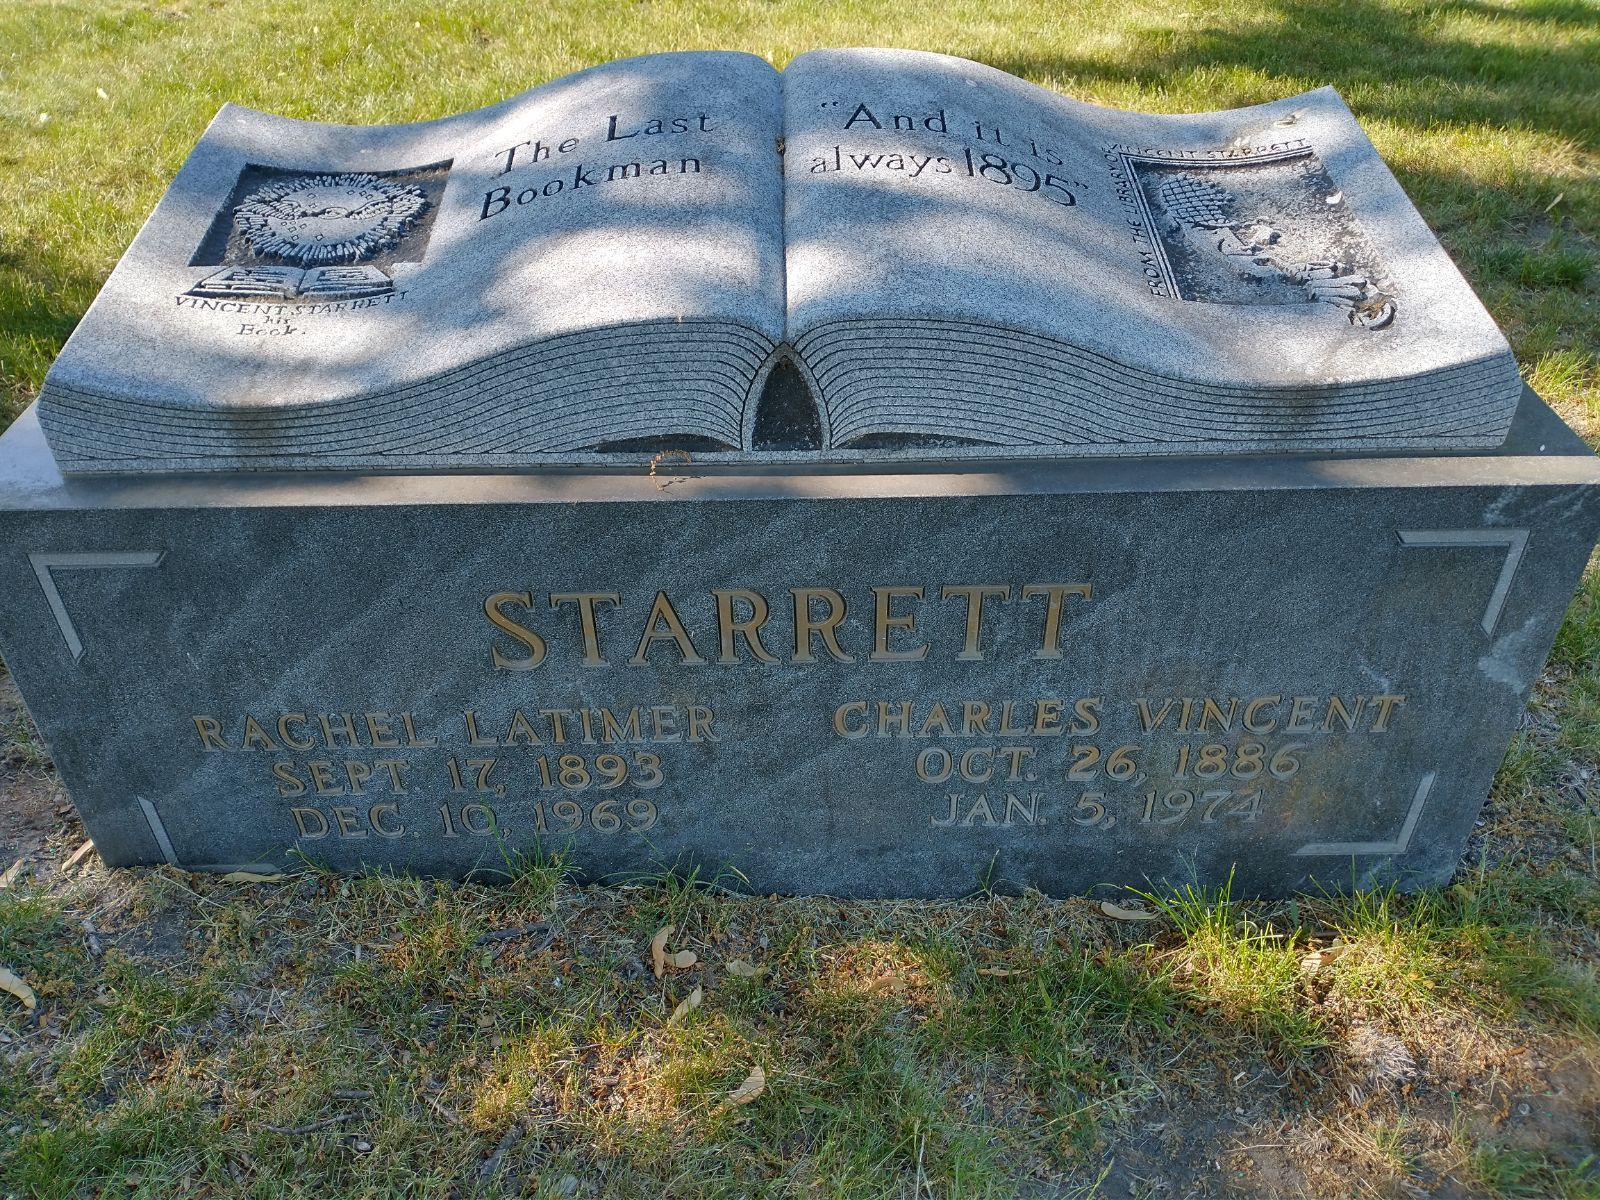 Huge headstone with Starrett on the front and a carved book on top.